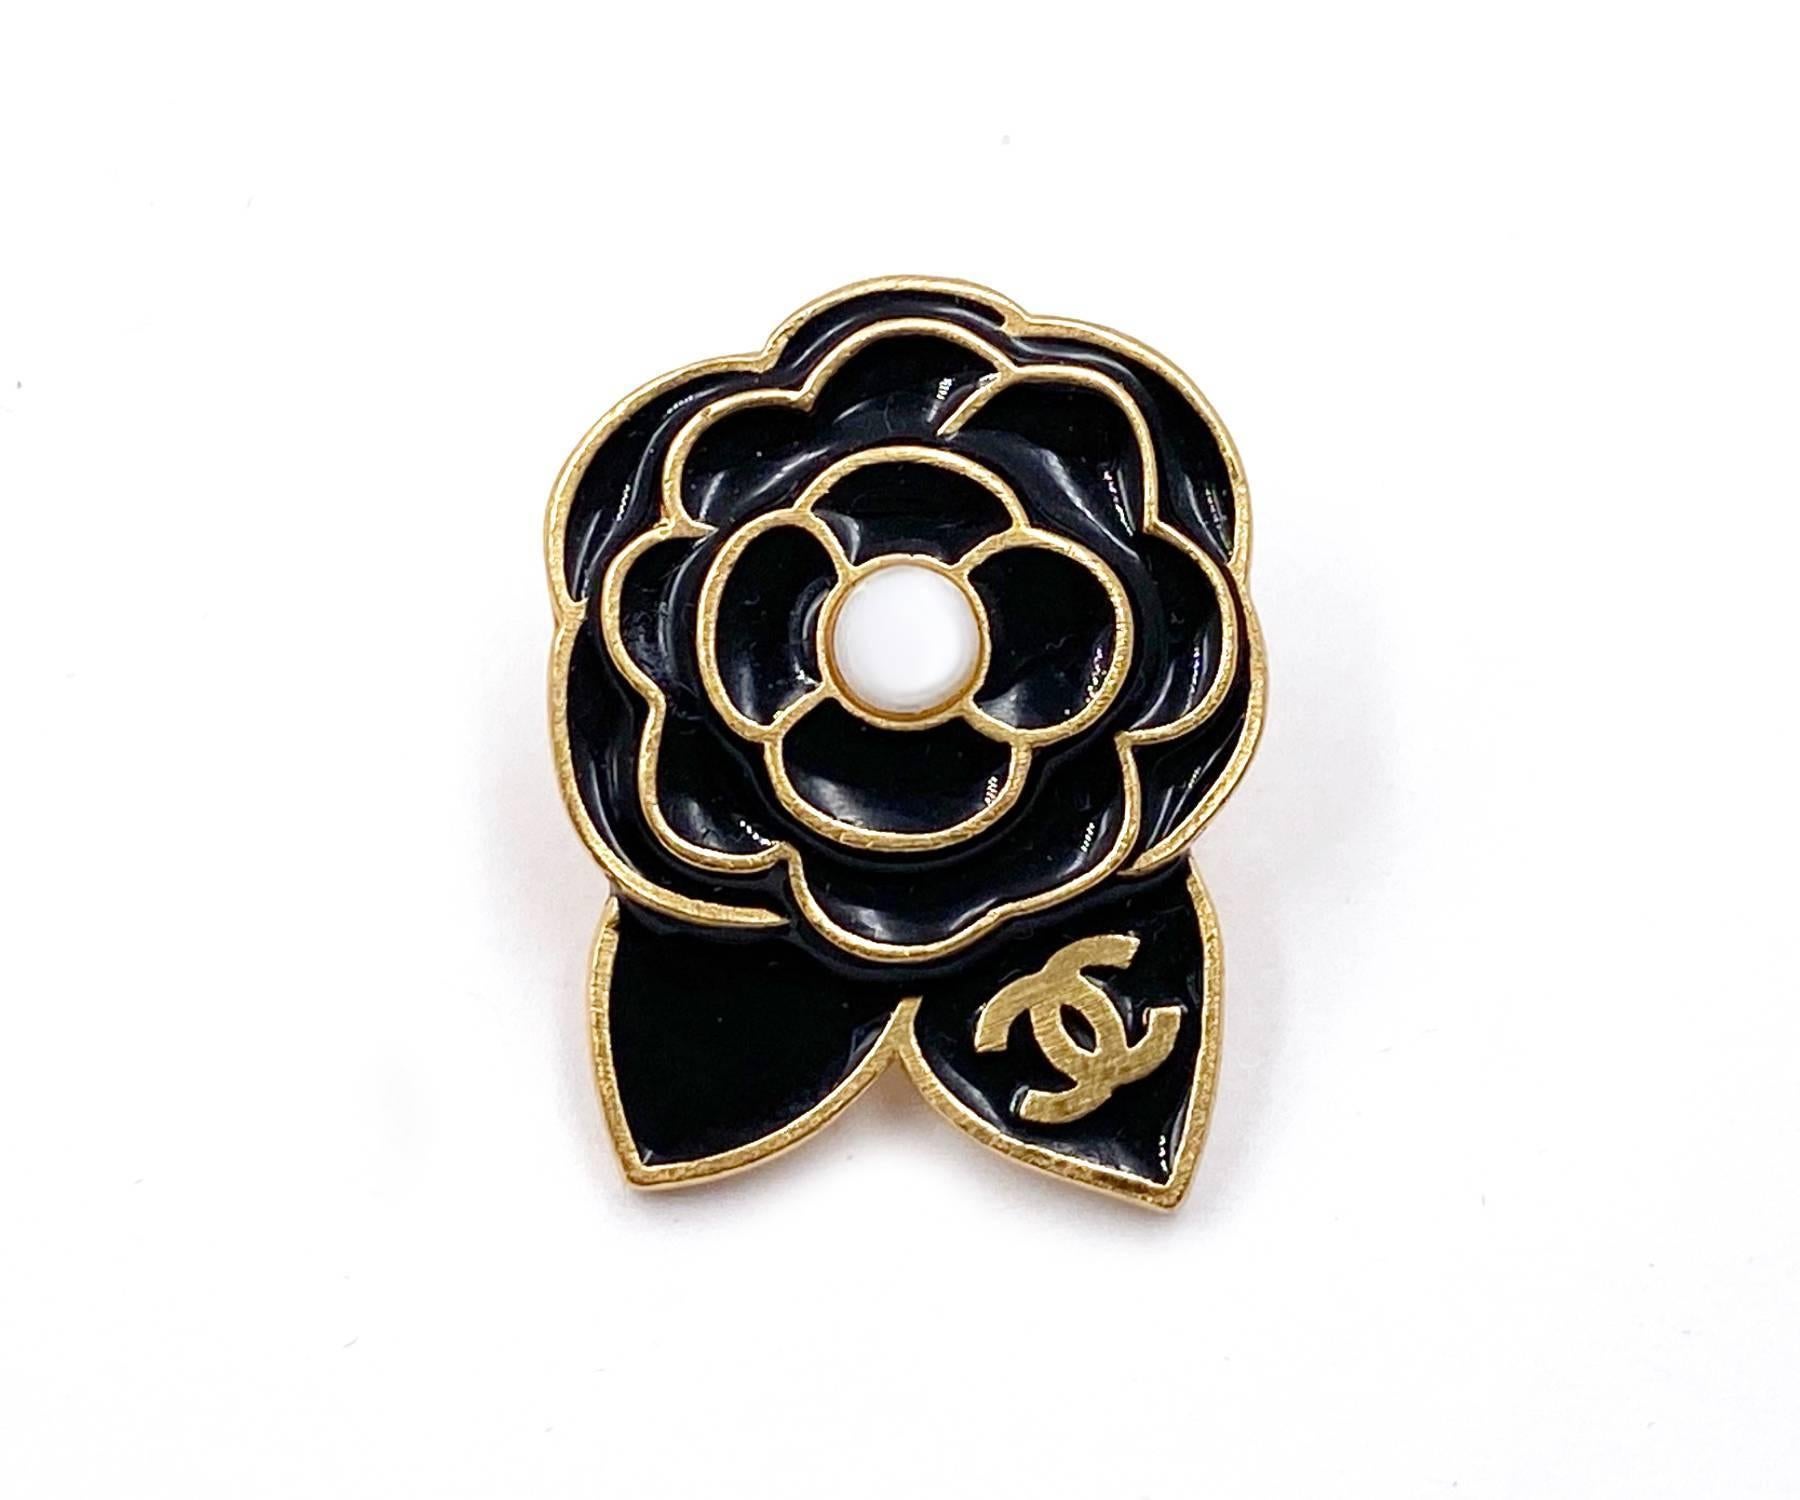 Chanel Vintage Gold Plated CC Black Camellia Pin

*Marked 02
*Made in France
*Comes with original box

-Approximately 1″ x 0.75″
-Very pretty and classic
-In a very good condition.

AB2042-00095

